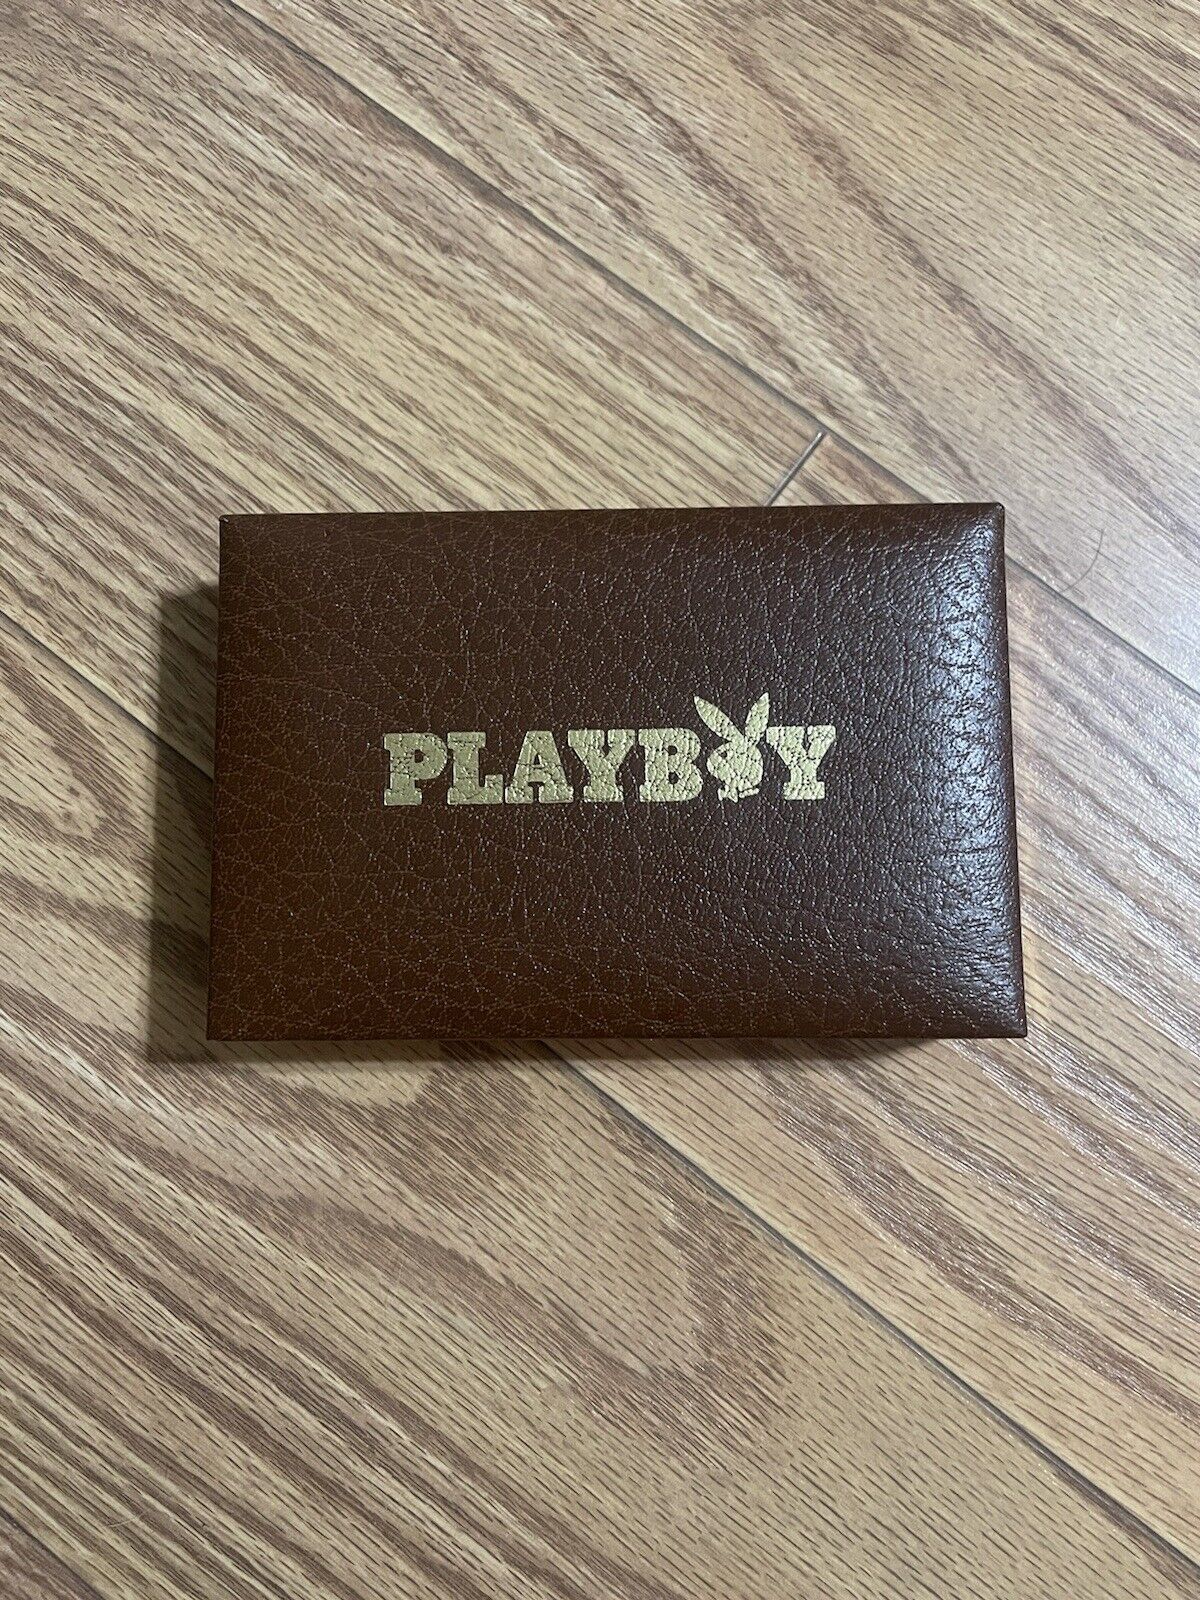 Vintage Playboy VIP Playing Cards 1978 with Case Anniversary Design 2 Decks